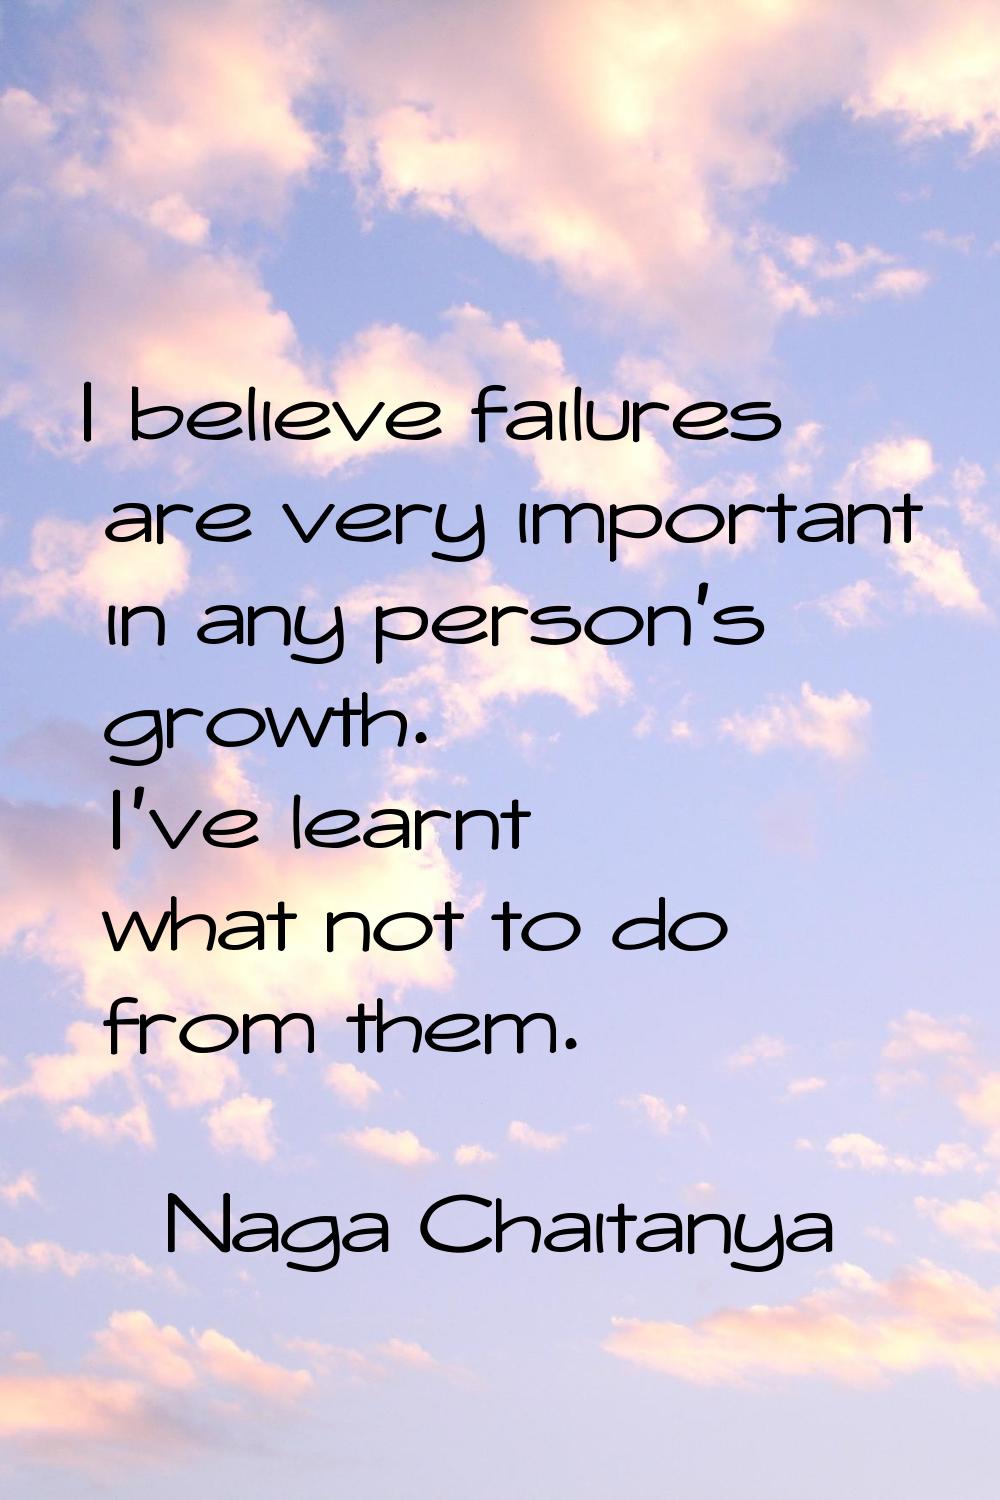 I believe failures are very important in any person's growth. I've learnt what not to do from them.